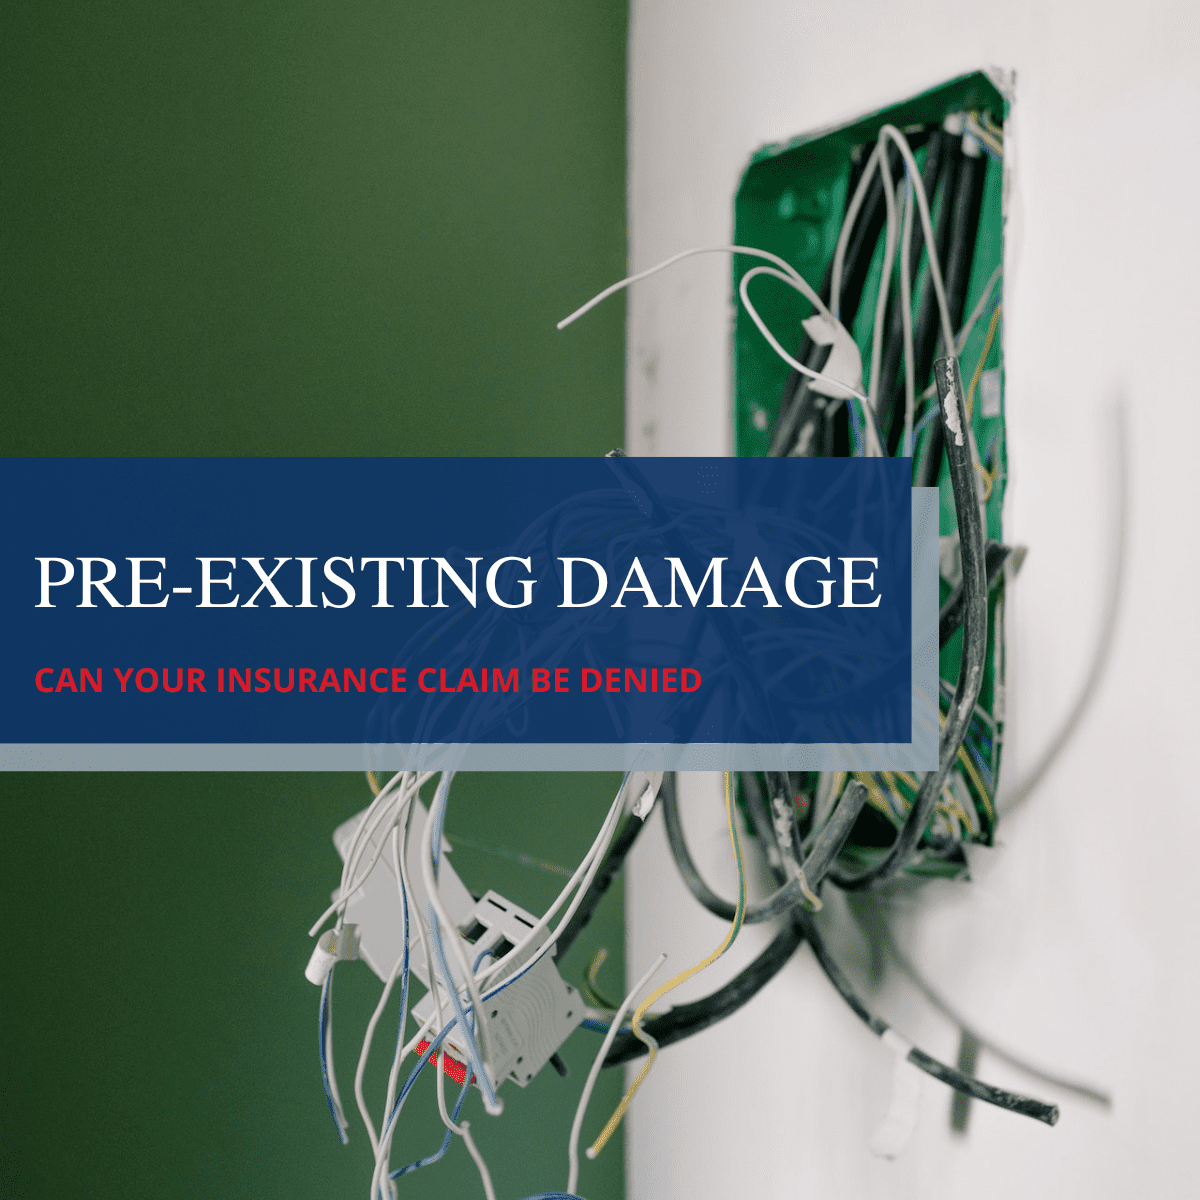 Can Your Insurance Claim Be Denied for Pre-Existing Damage?